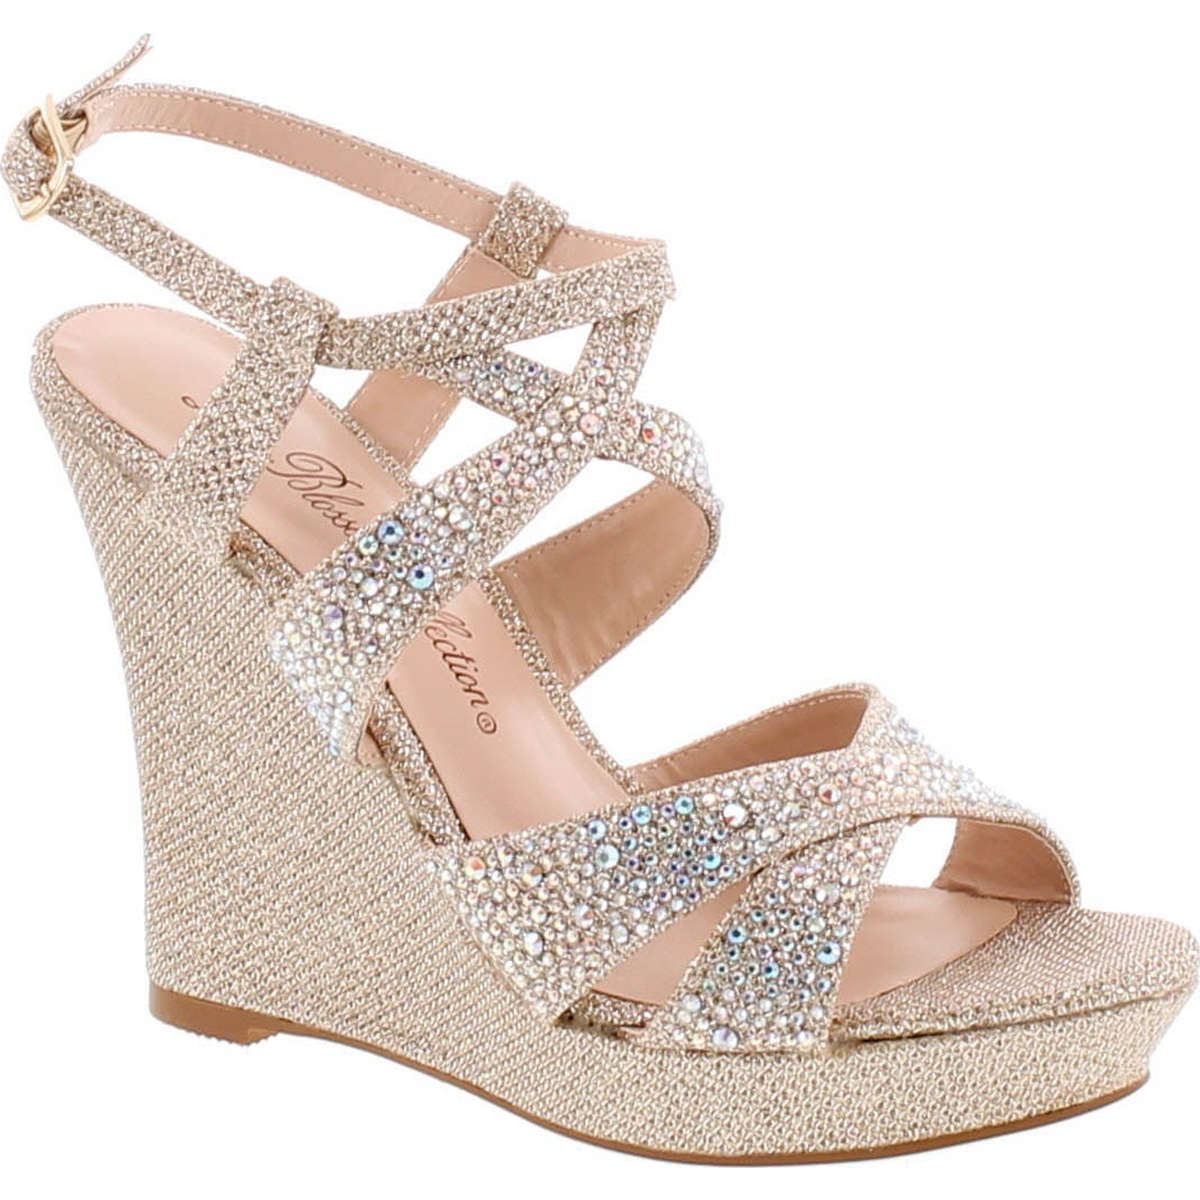 Static Footwear De Blossom Alle-8 High Heel Wedge Sandal With Crystal Embellishment Style Balle8